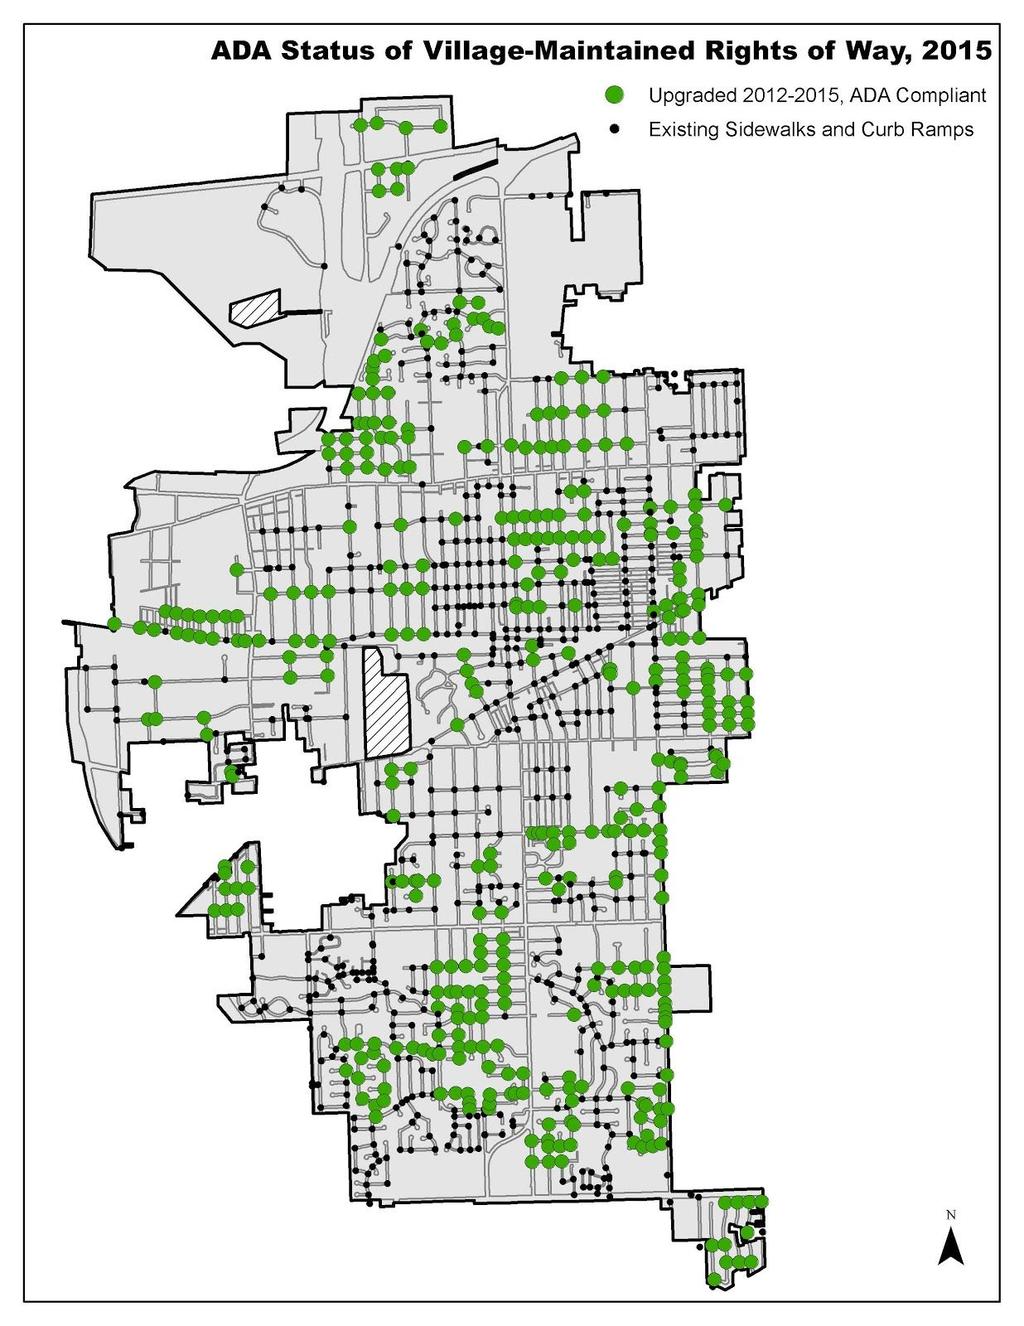 Map: Curb Ramps The Village s self-evaluation of curb ramps had the following key findings: Most curb ramps either meet the standard or are generally accessible Accessibility barriers like sidewalk